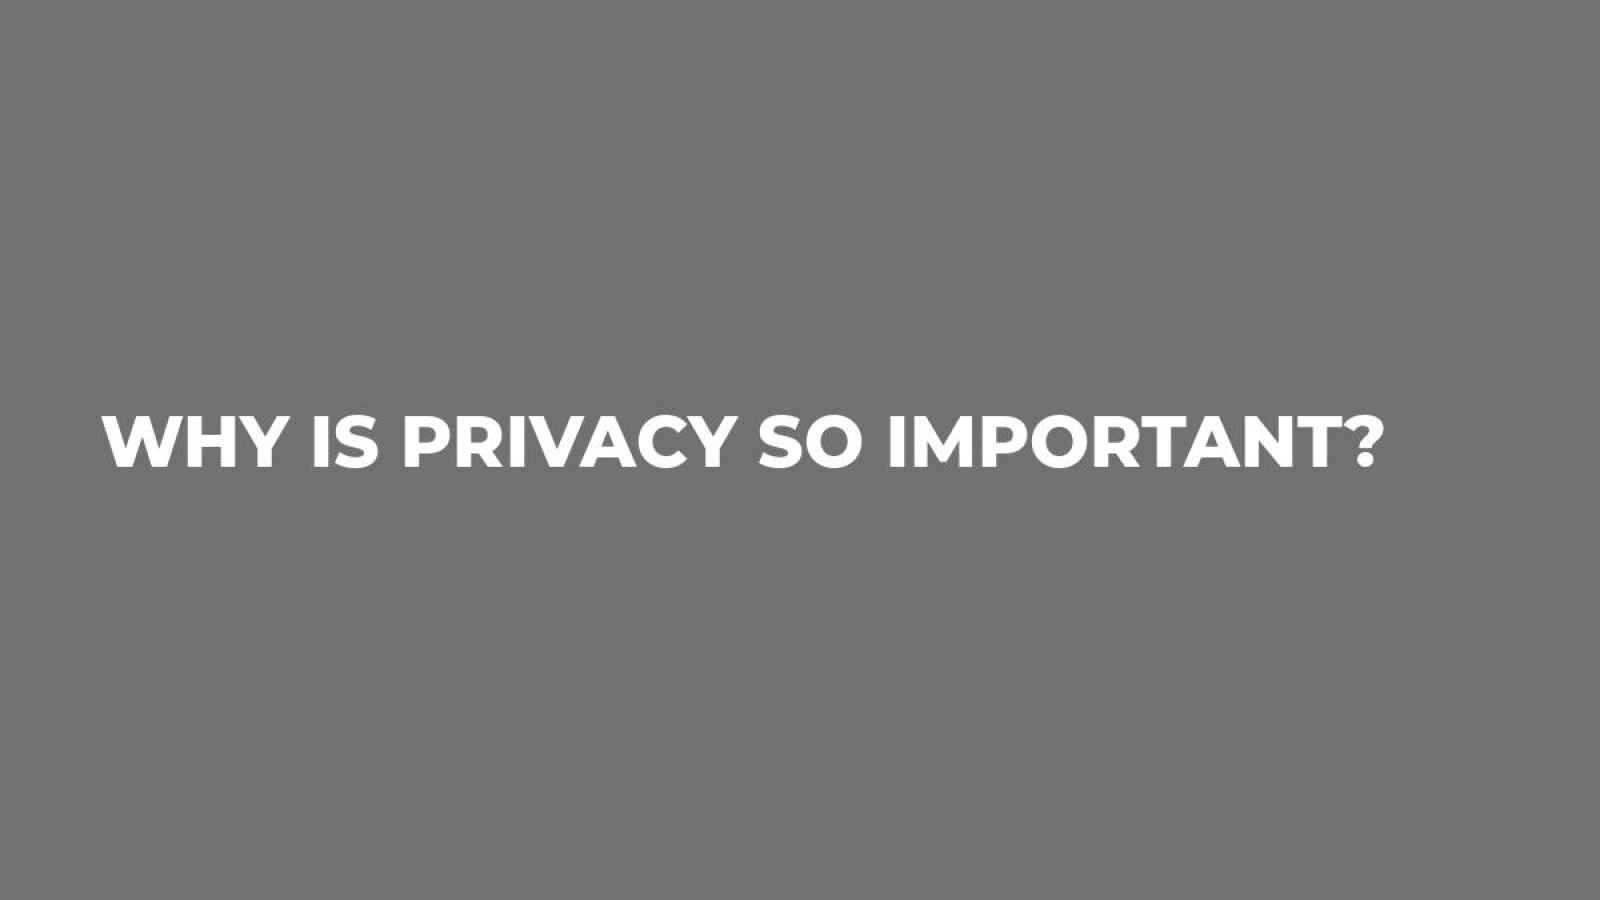 Why is Privacy so important?